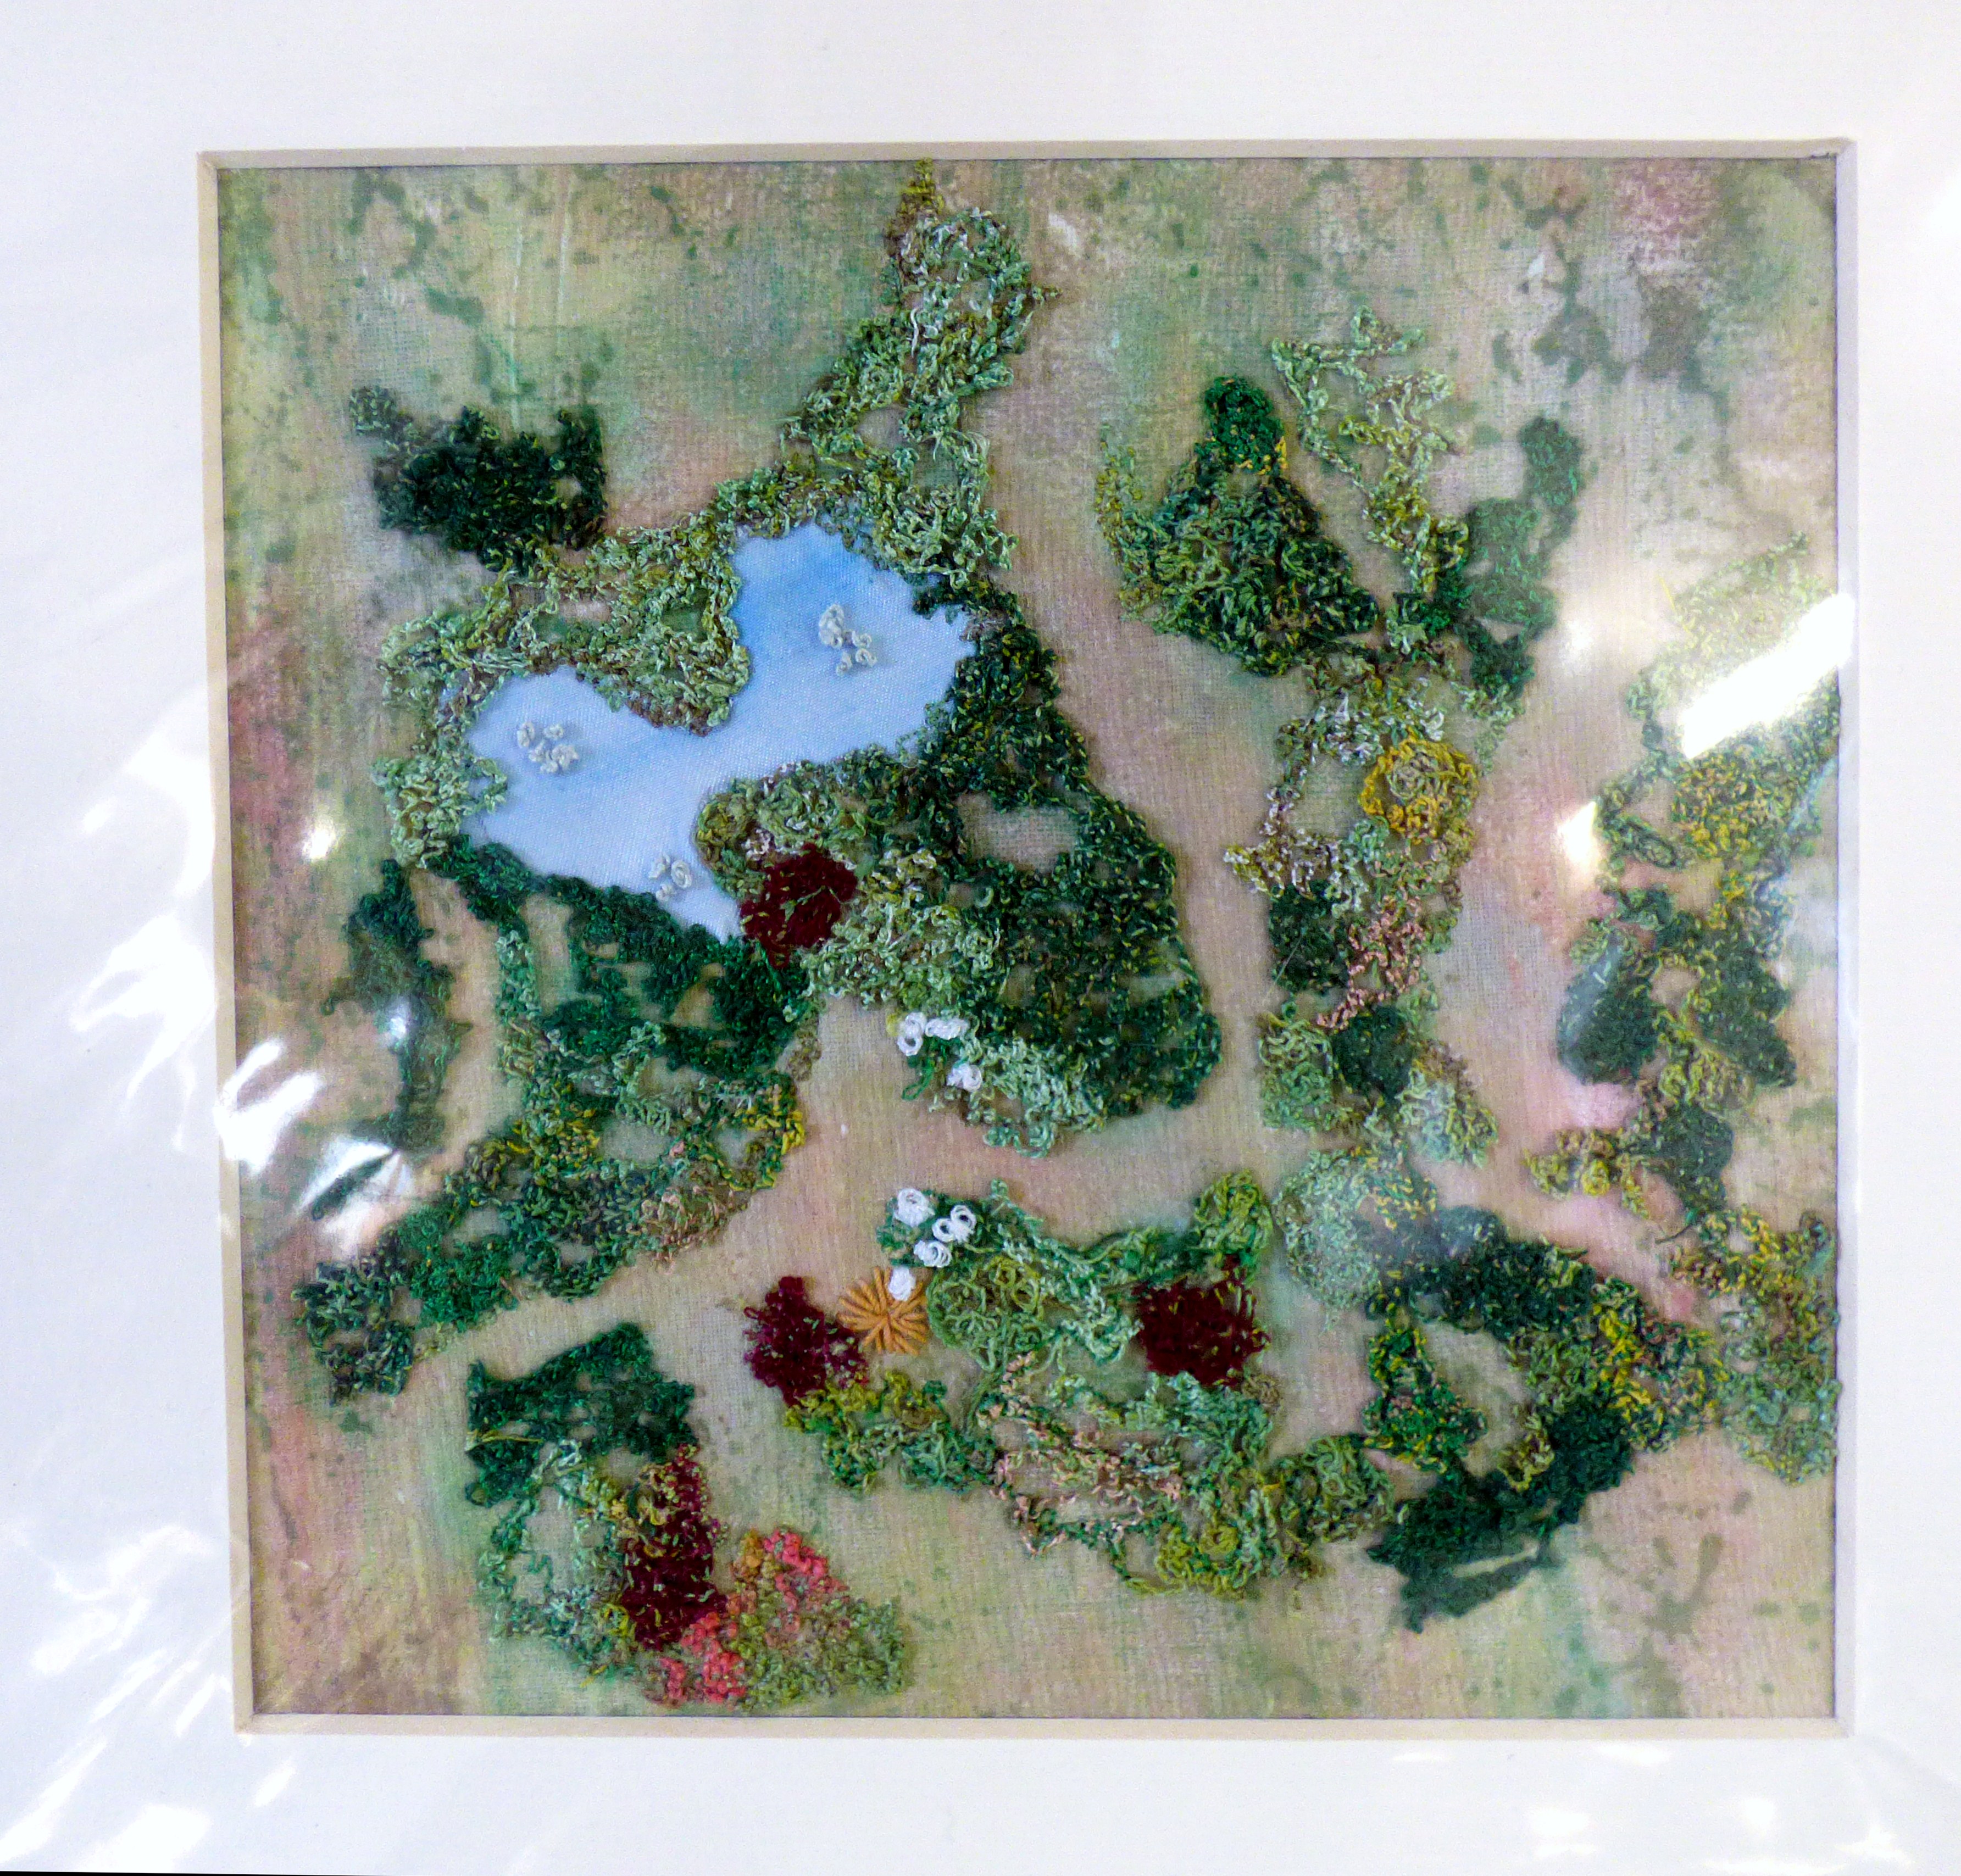 embroidery by Mary Bryning at "Maps in Stitch" Talk by Mary Bryning, October 2023